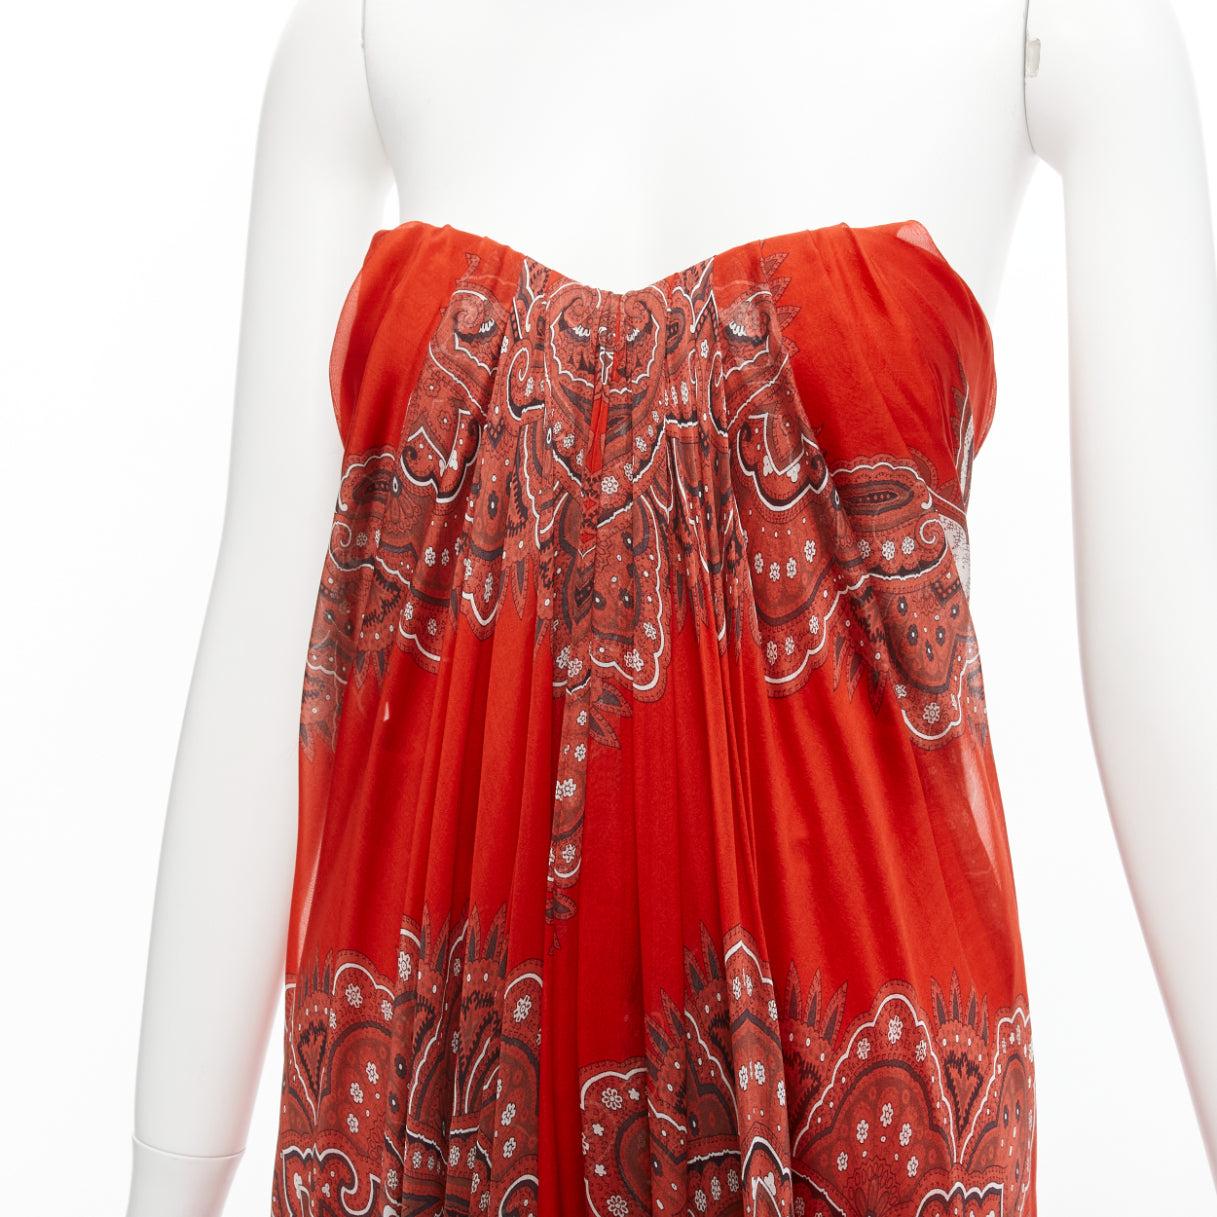 ALEXANDER MCQUEEN 2016 red 100% silk paisley strapless flowy maxi gown IT36 XXS
Reference: LNKO/A02273
Brand: Alexander McQueen
Collection: 2016
Material: Silk
Color: Red
Pattern: Paisley
Closure: Zip
Lining: Nude Fabric
Extra Details: Back zip.